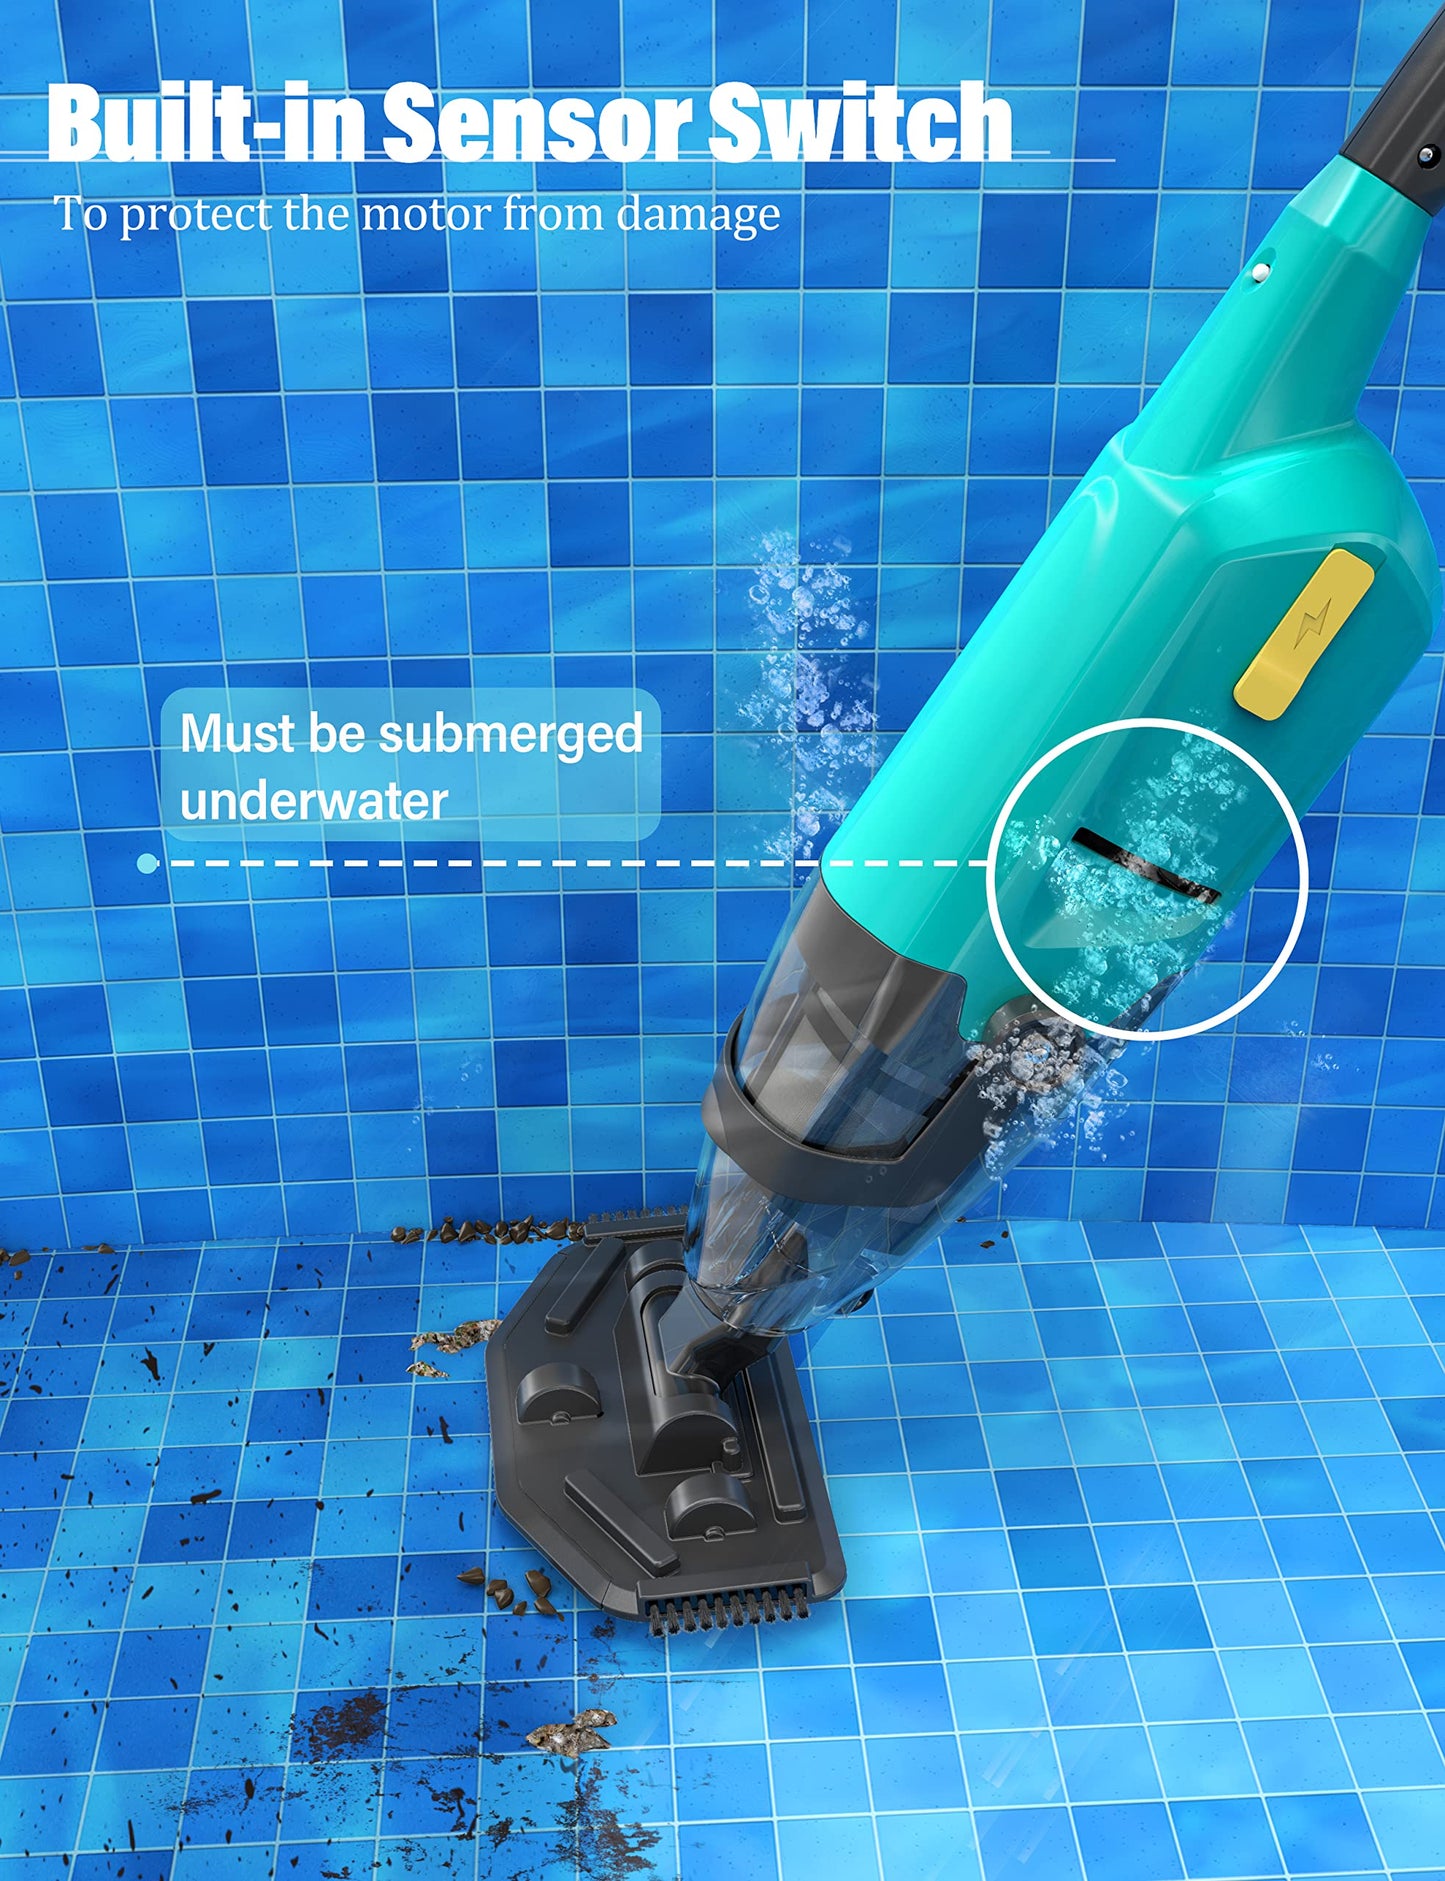 Efurden Handheld Pool Vacuum, Rechargeable Pool Cleaner with Running Time up to 60-Minutes Ideal for Above Ground Pools, Spas and Hot Tub for Sand and Debris, Green